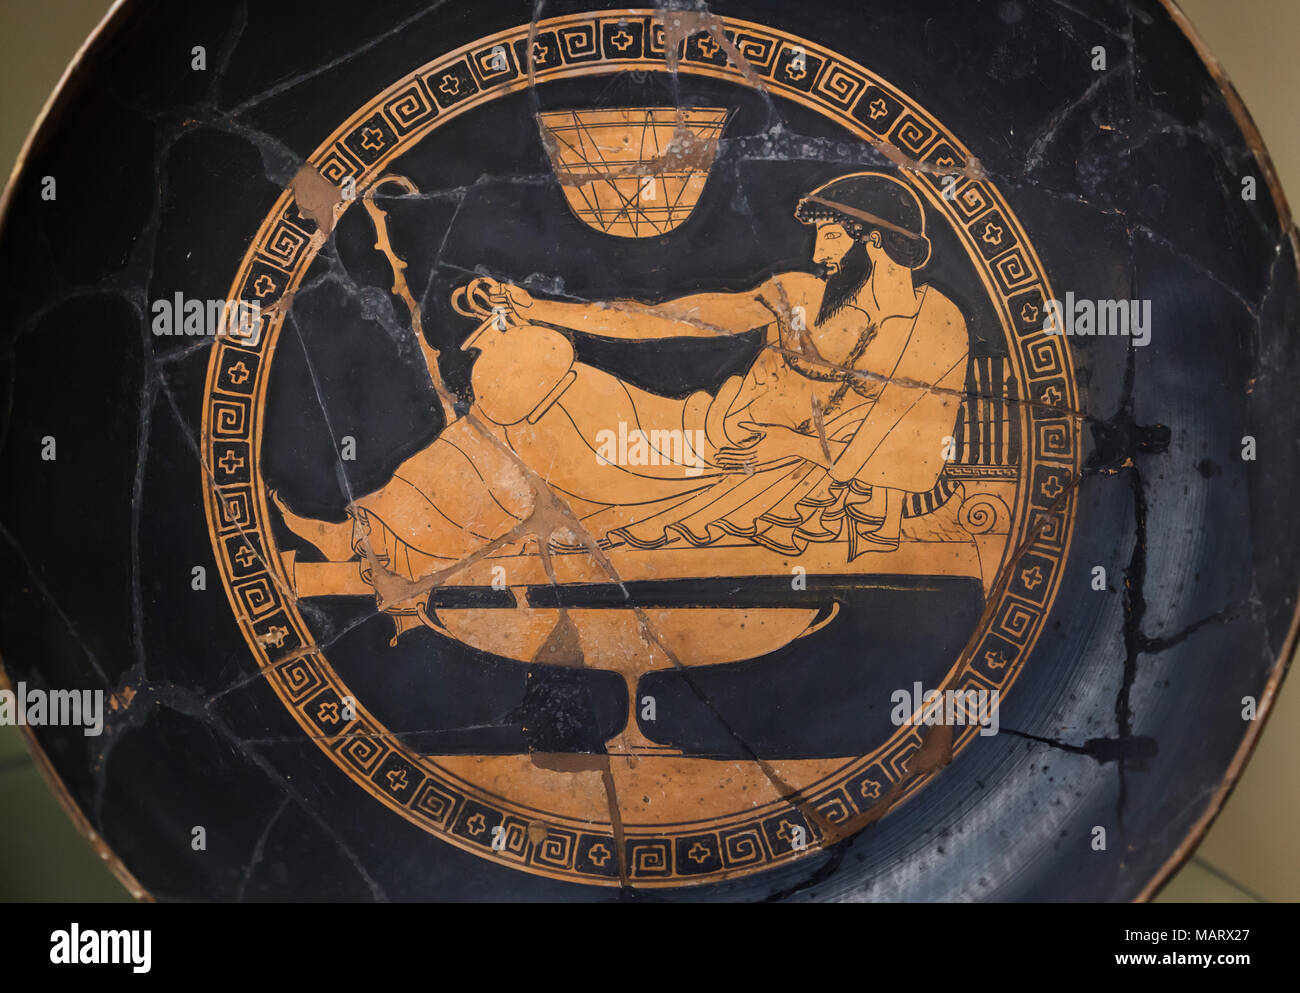 Bearded man reclining on the kline. Attic red-figure kylix painted by Douris Painter dated from the end of the 6th century BC or the beginning of the 5th century BC on display in the Museo archeologico nazionale (National Archaeological Museum) in Florence, Tuscany, Italy. Stock Photo